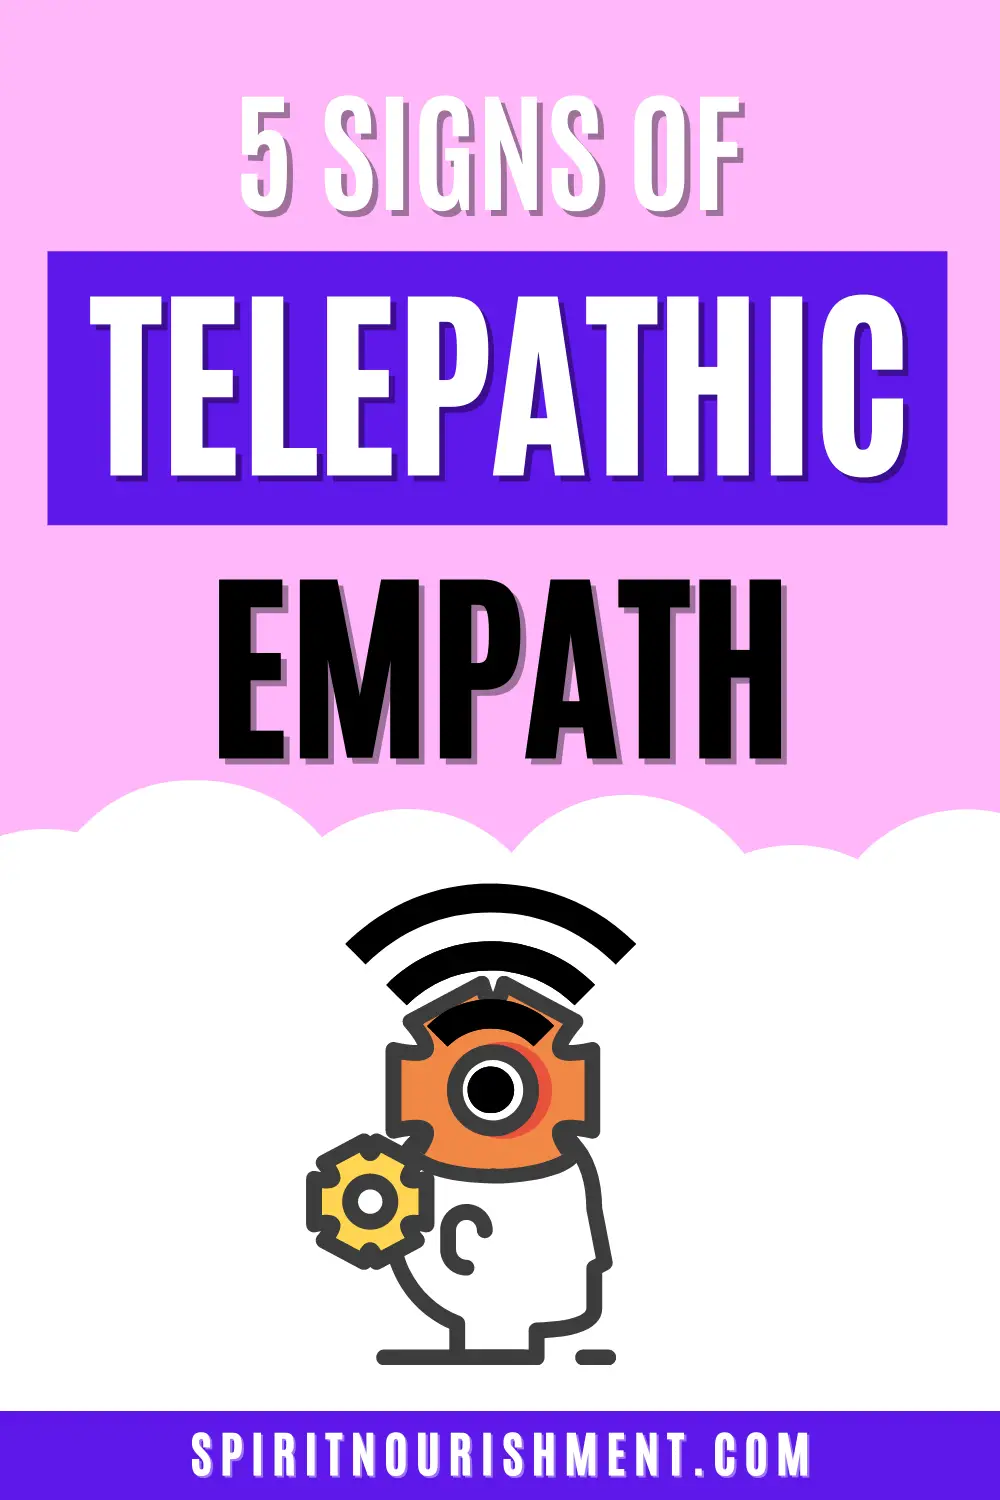 5 Signs You're a Telepathic Empath and What It Means